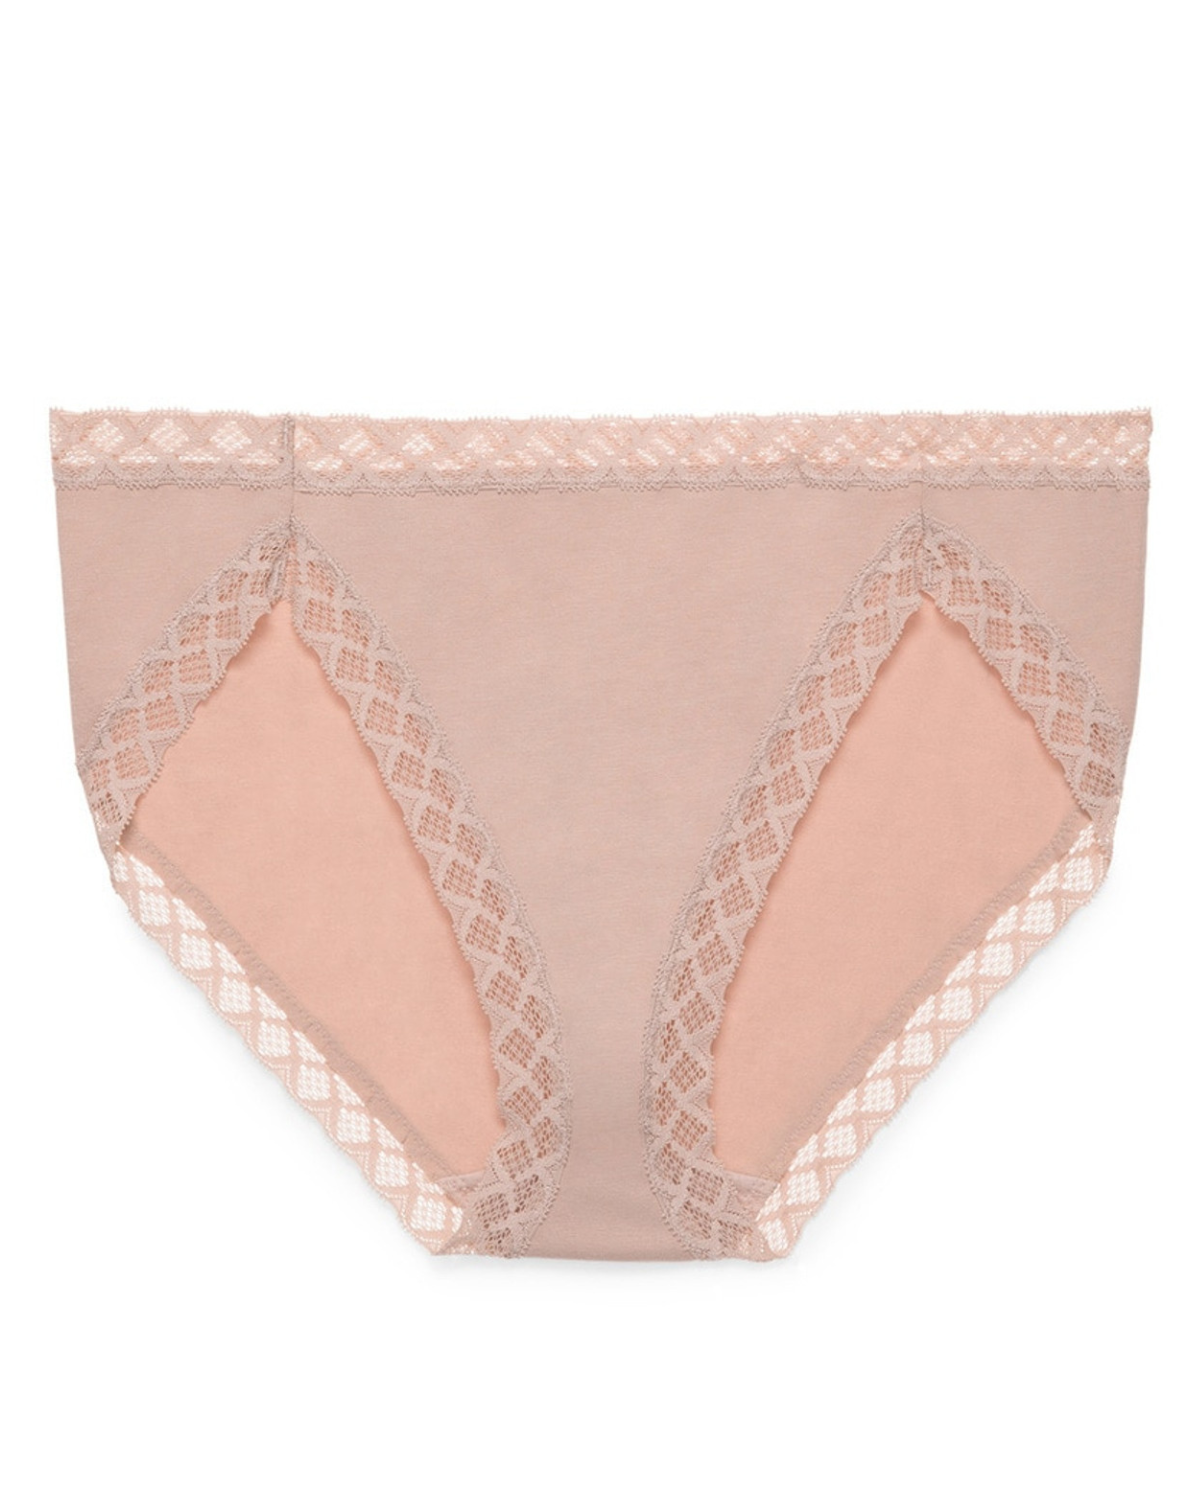 Natori Bliss Perfection French Cut Brief Panty (More colors available) - 152058